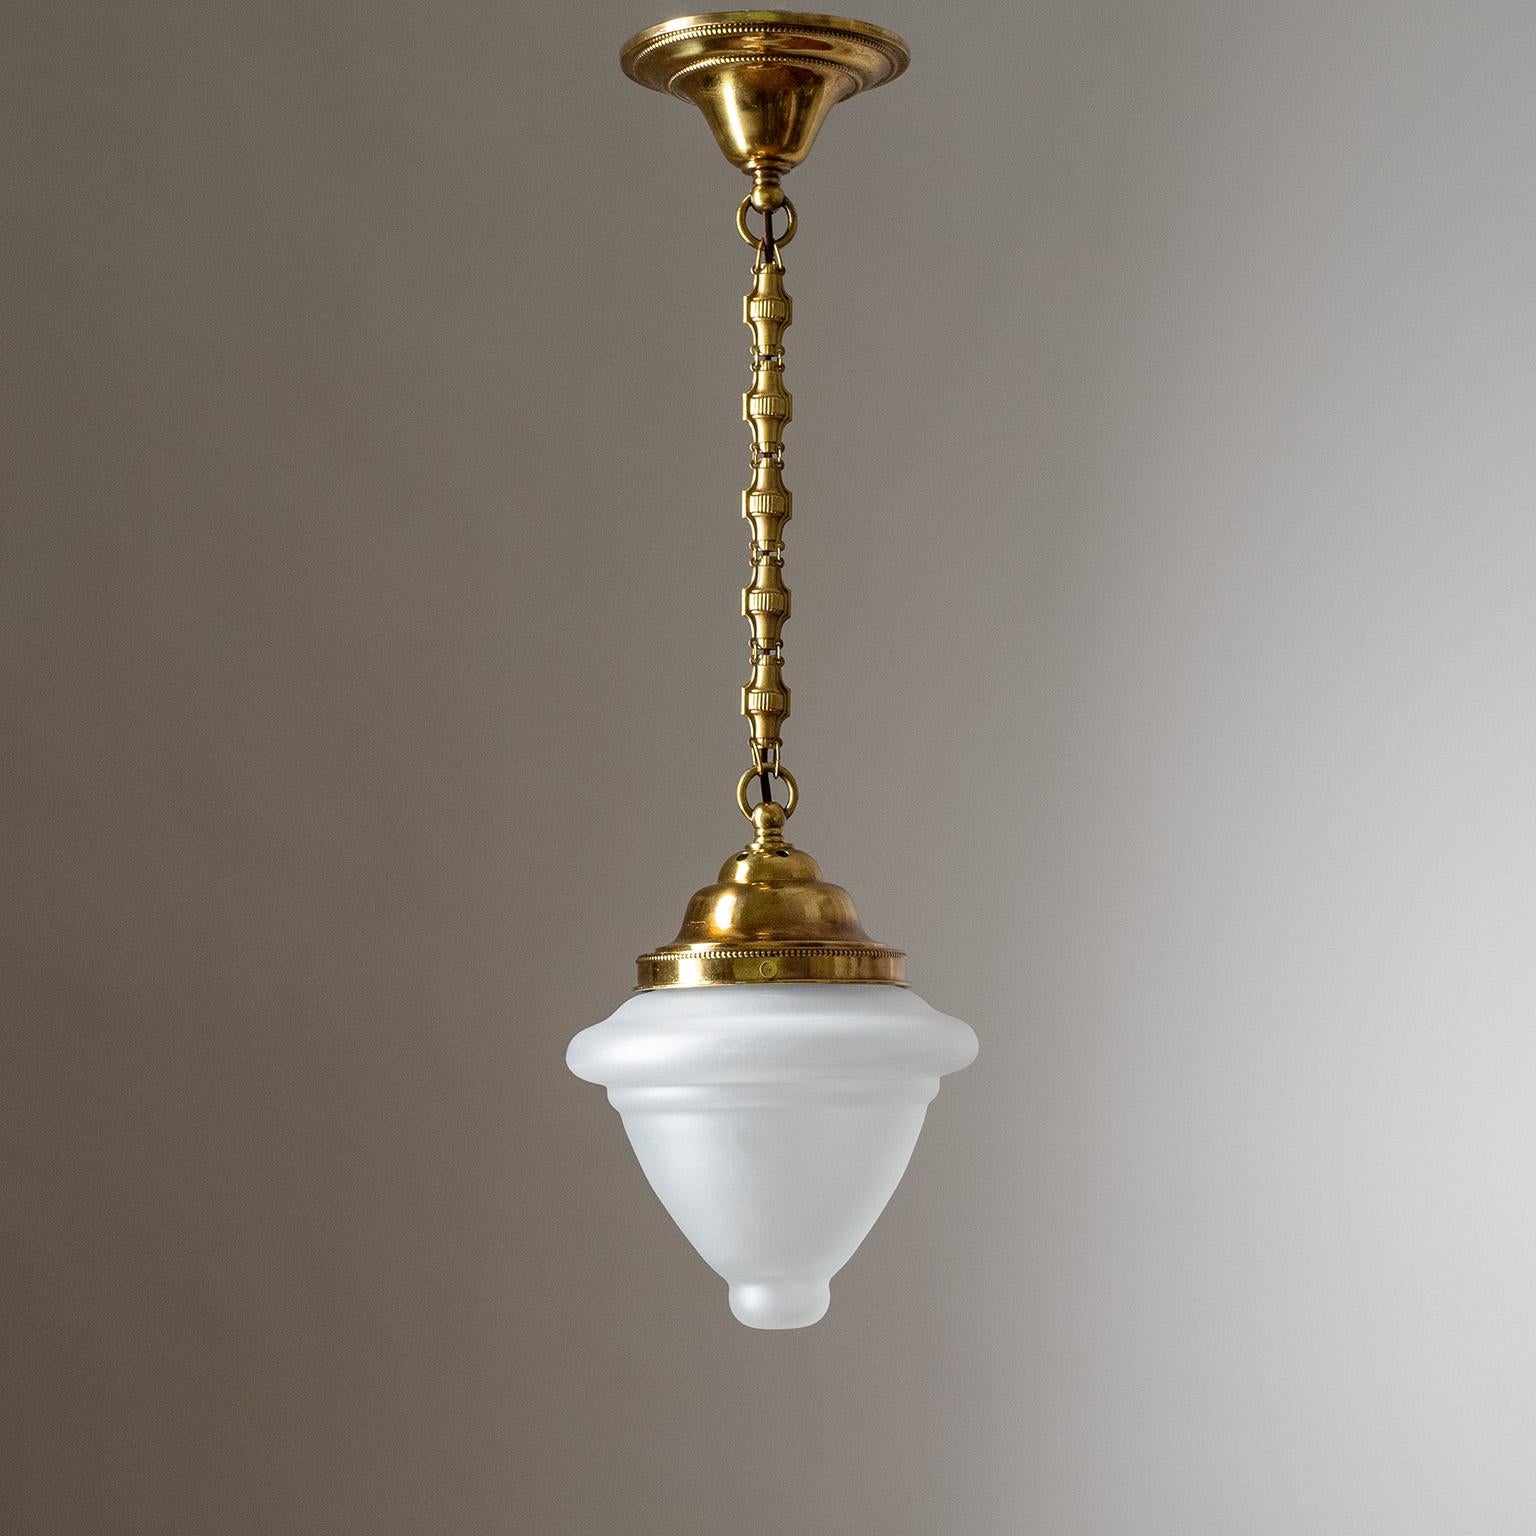 Fine Austrian brass pendant from the 1920s. Clear glass diffuser with a satin finish on the outside. One original brass and ceramic E27 socket with new wiring. Height without chain is approximately 13inches/34cm.